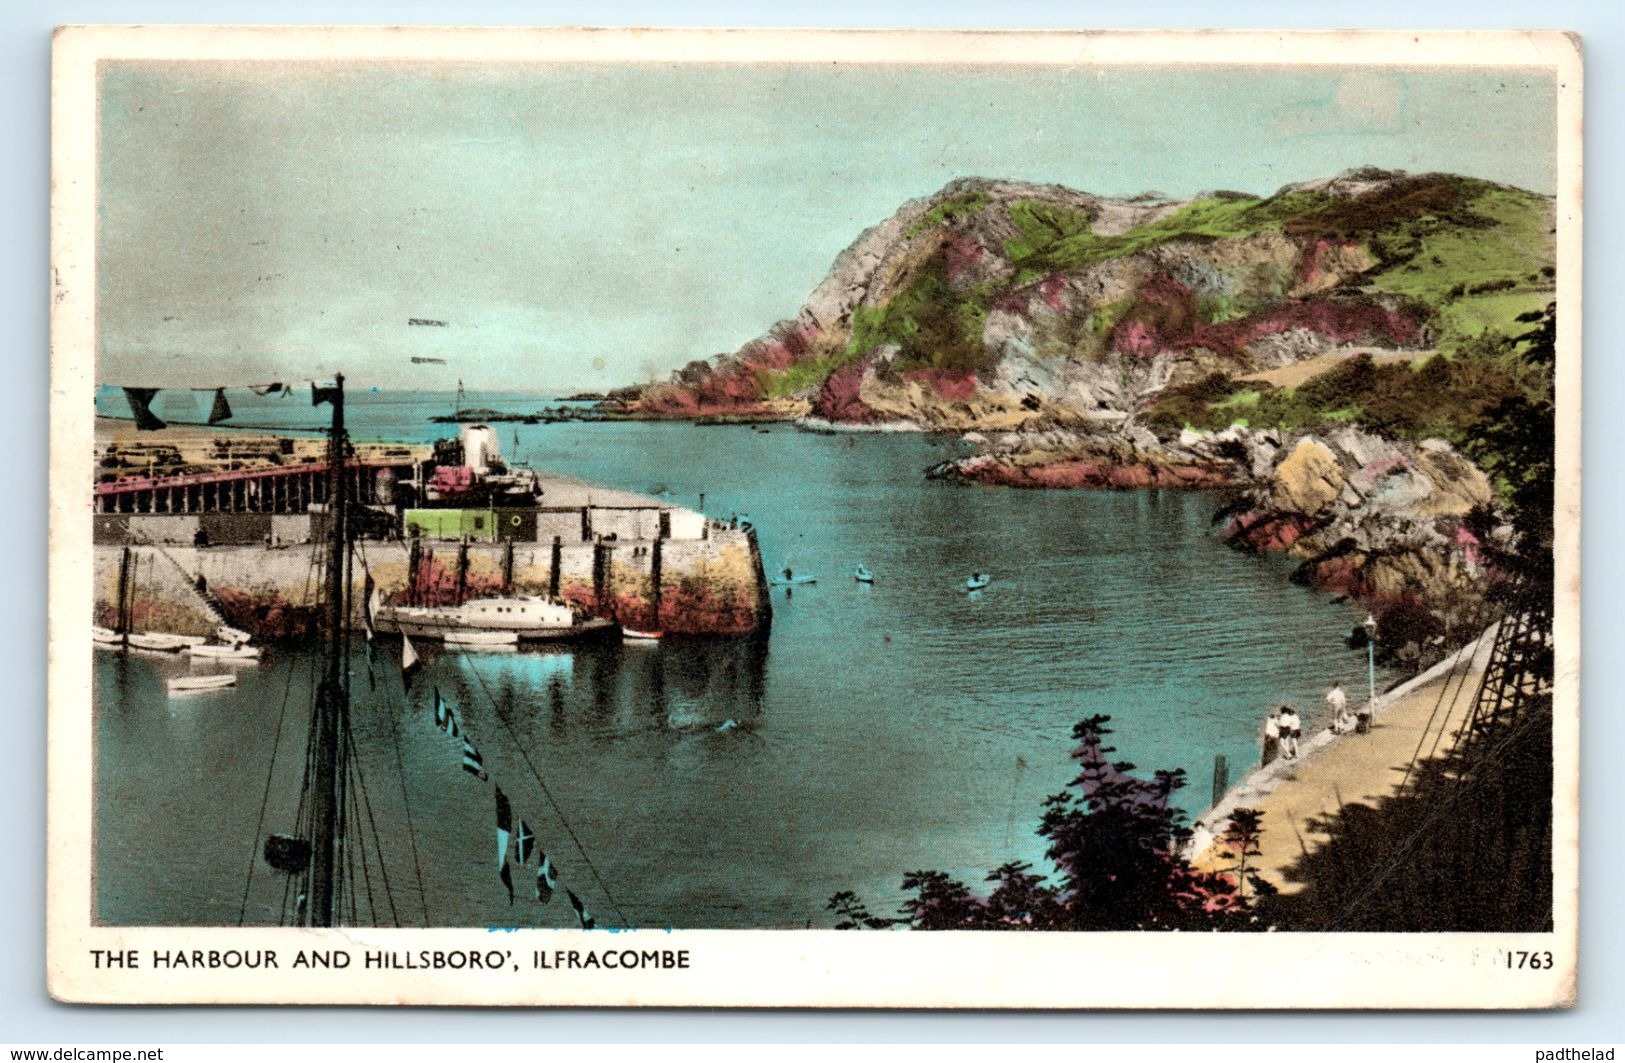 POSTCARDTHE HARBOUR AND HILLSBORO ILFRACOMBE 1763 POSTED 1954 TO COALVILLE LEICESTER - Ilfracombe